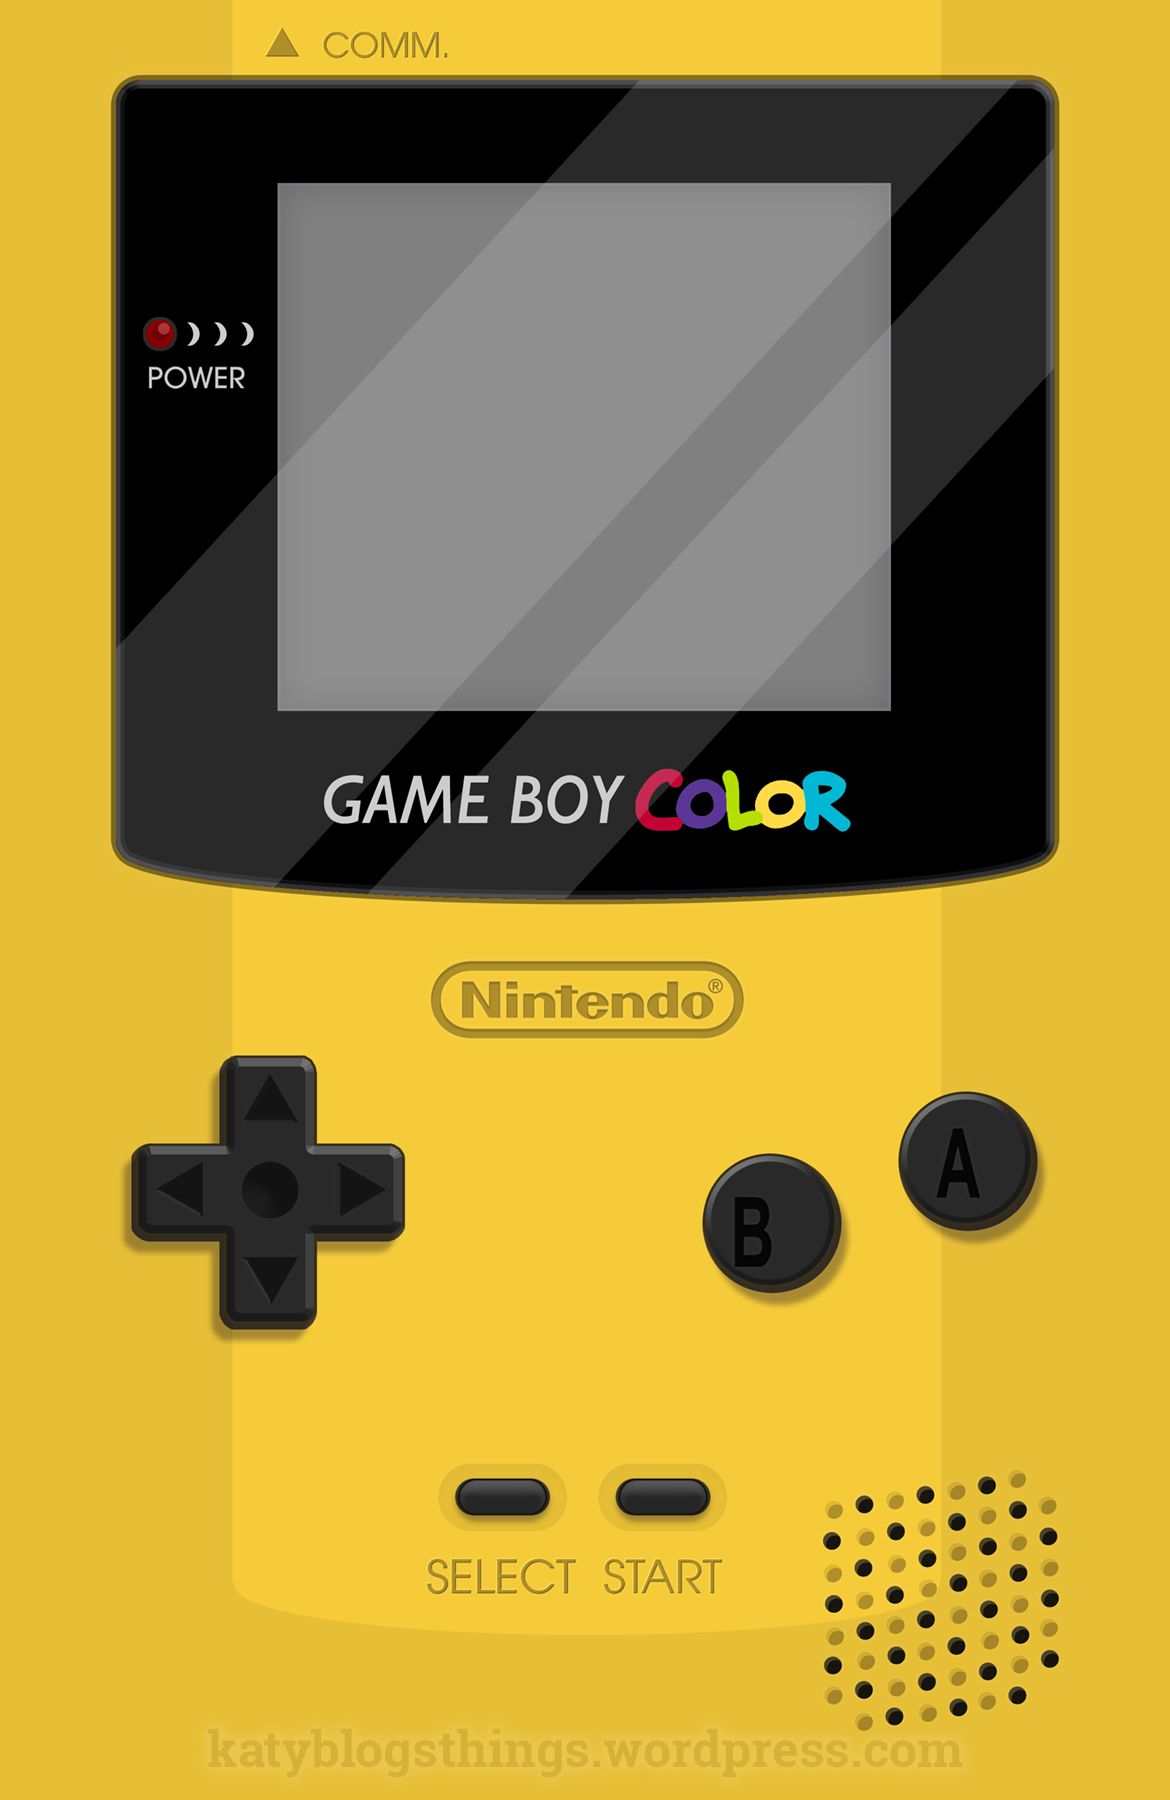 A Gameboy color in yellow with the words Game Boy Color on the screen - Game Boy